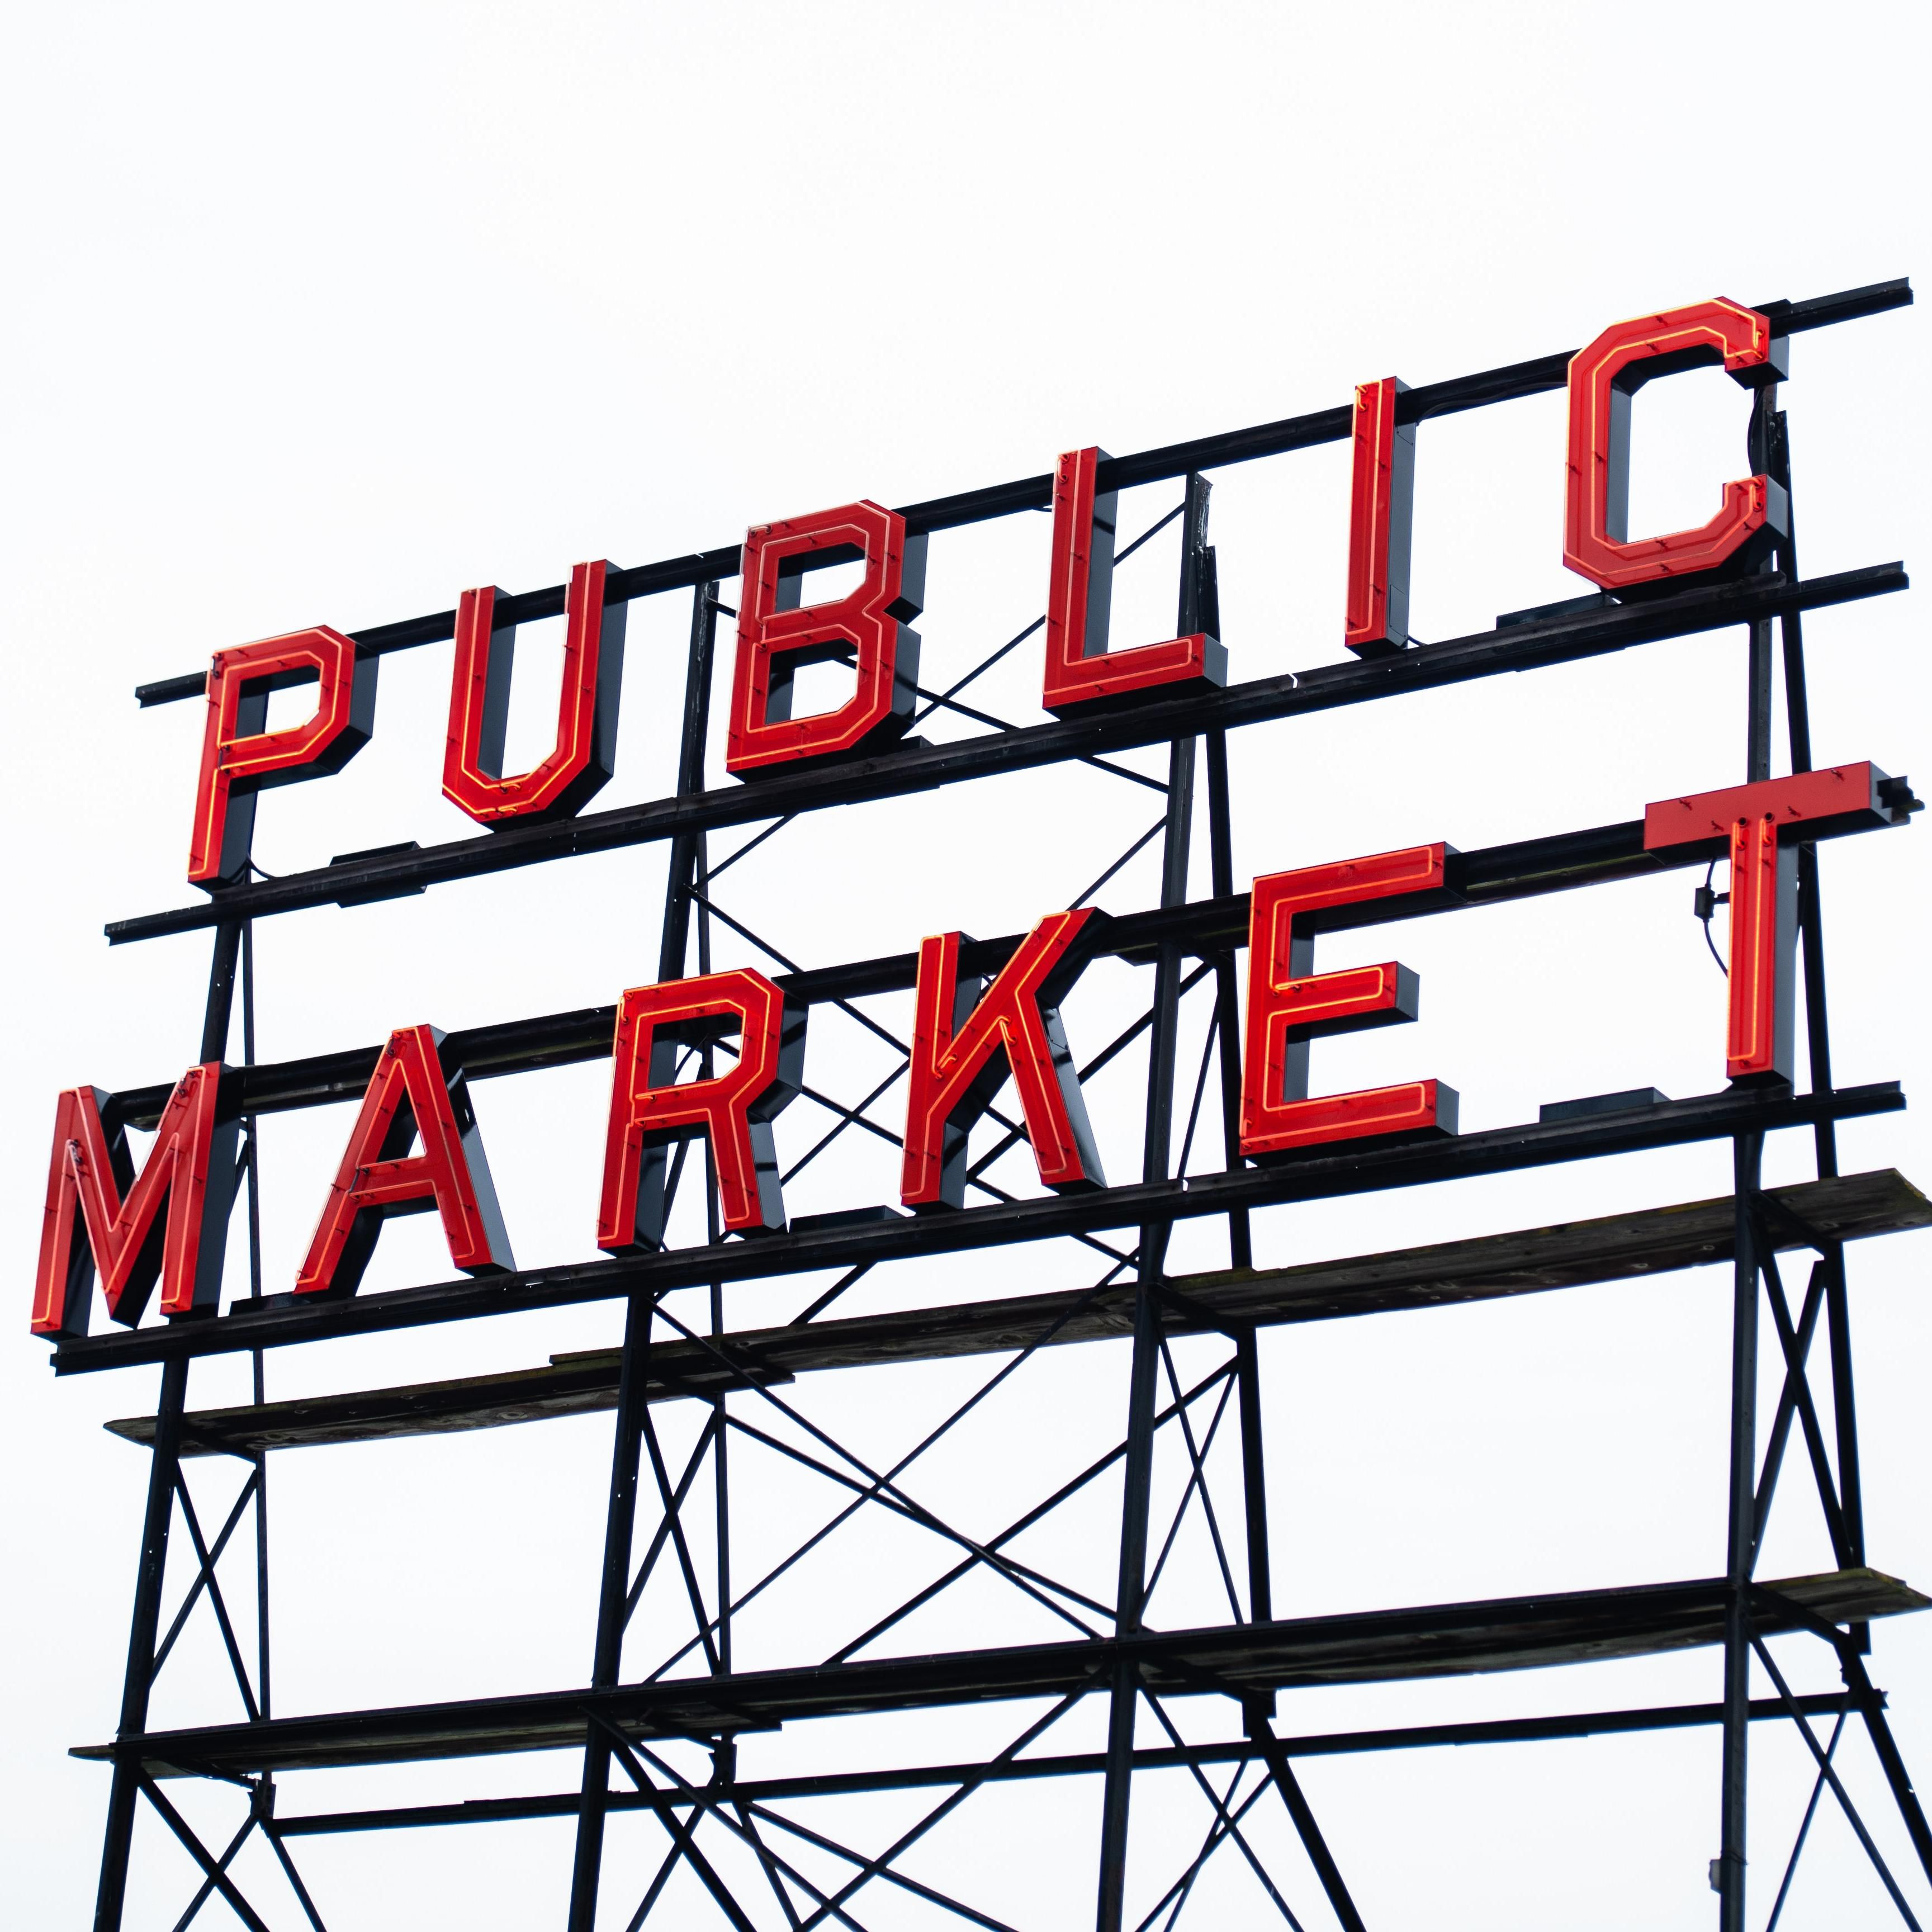 Minutes away from the internationally recognized Pike Place Market